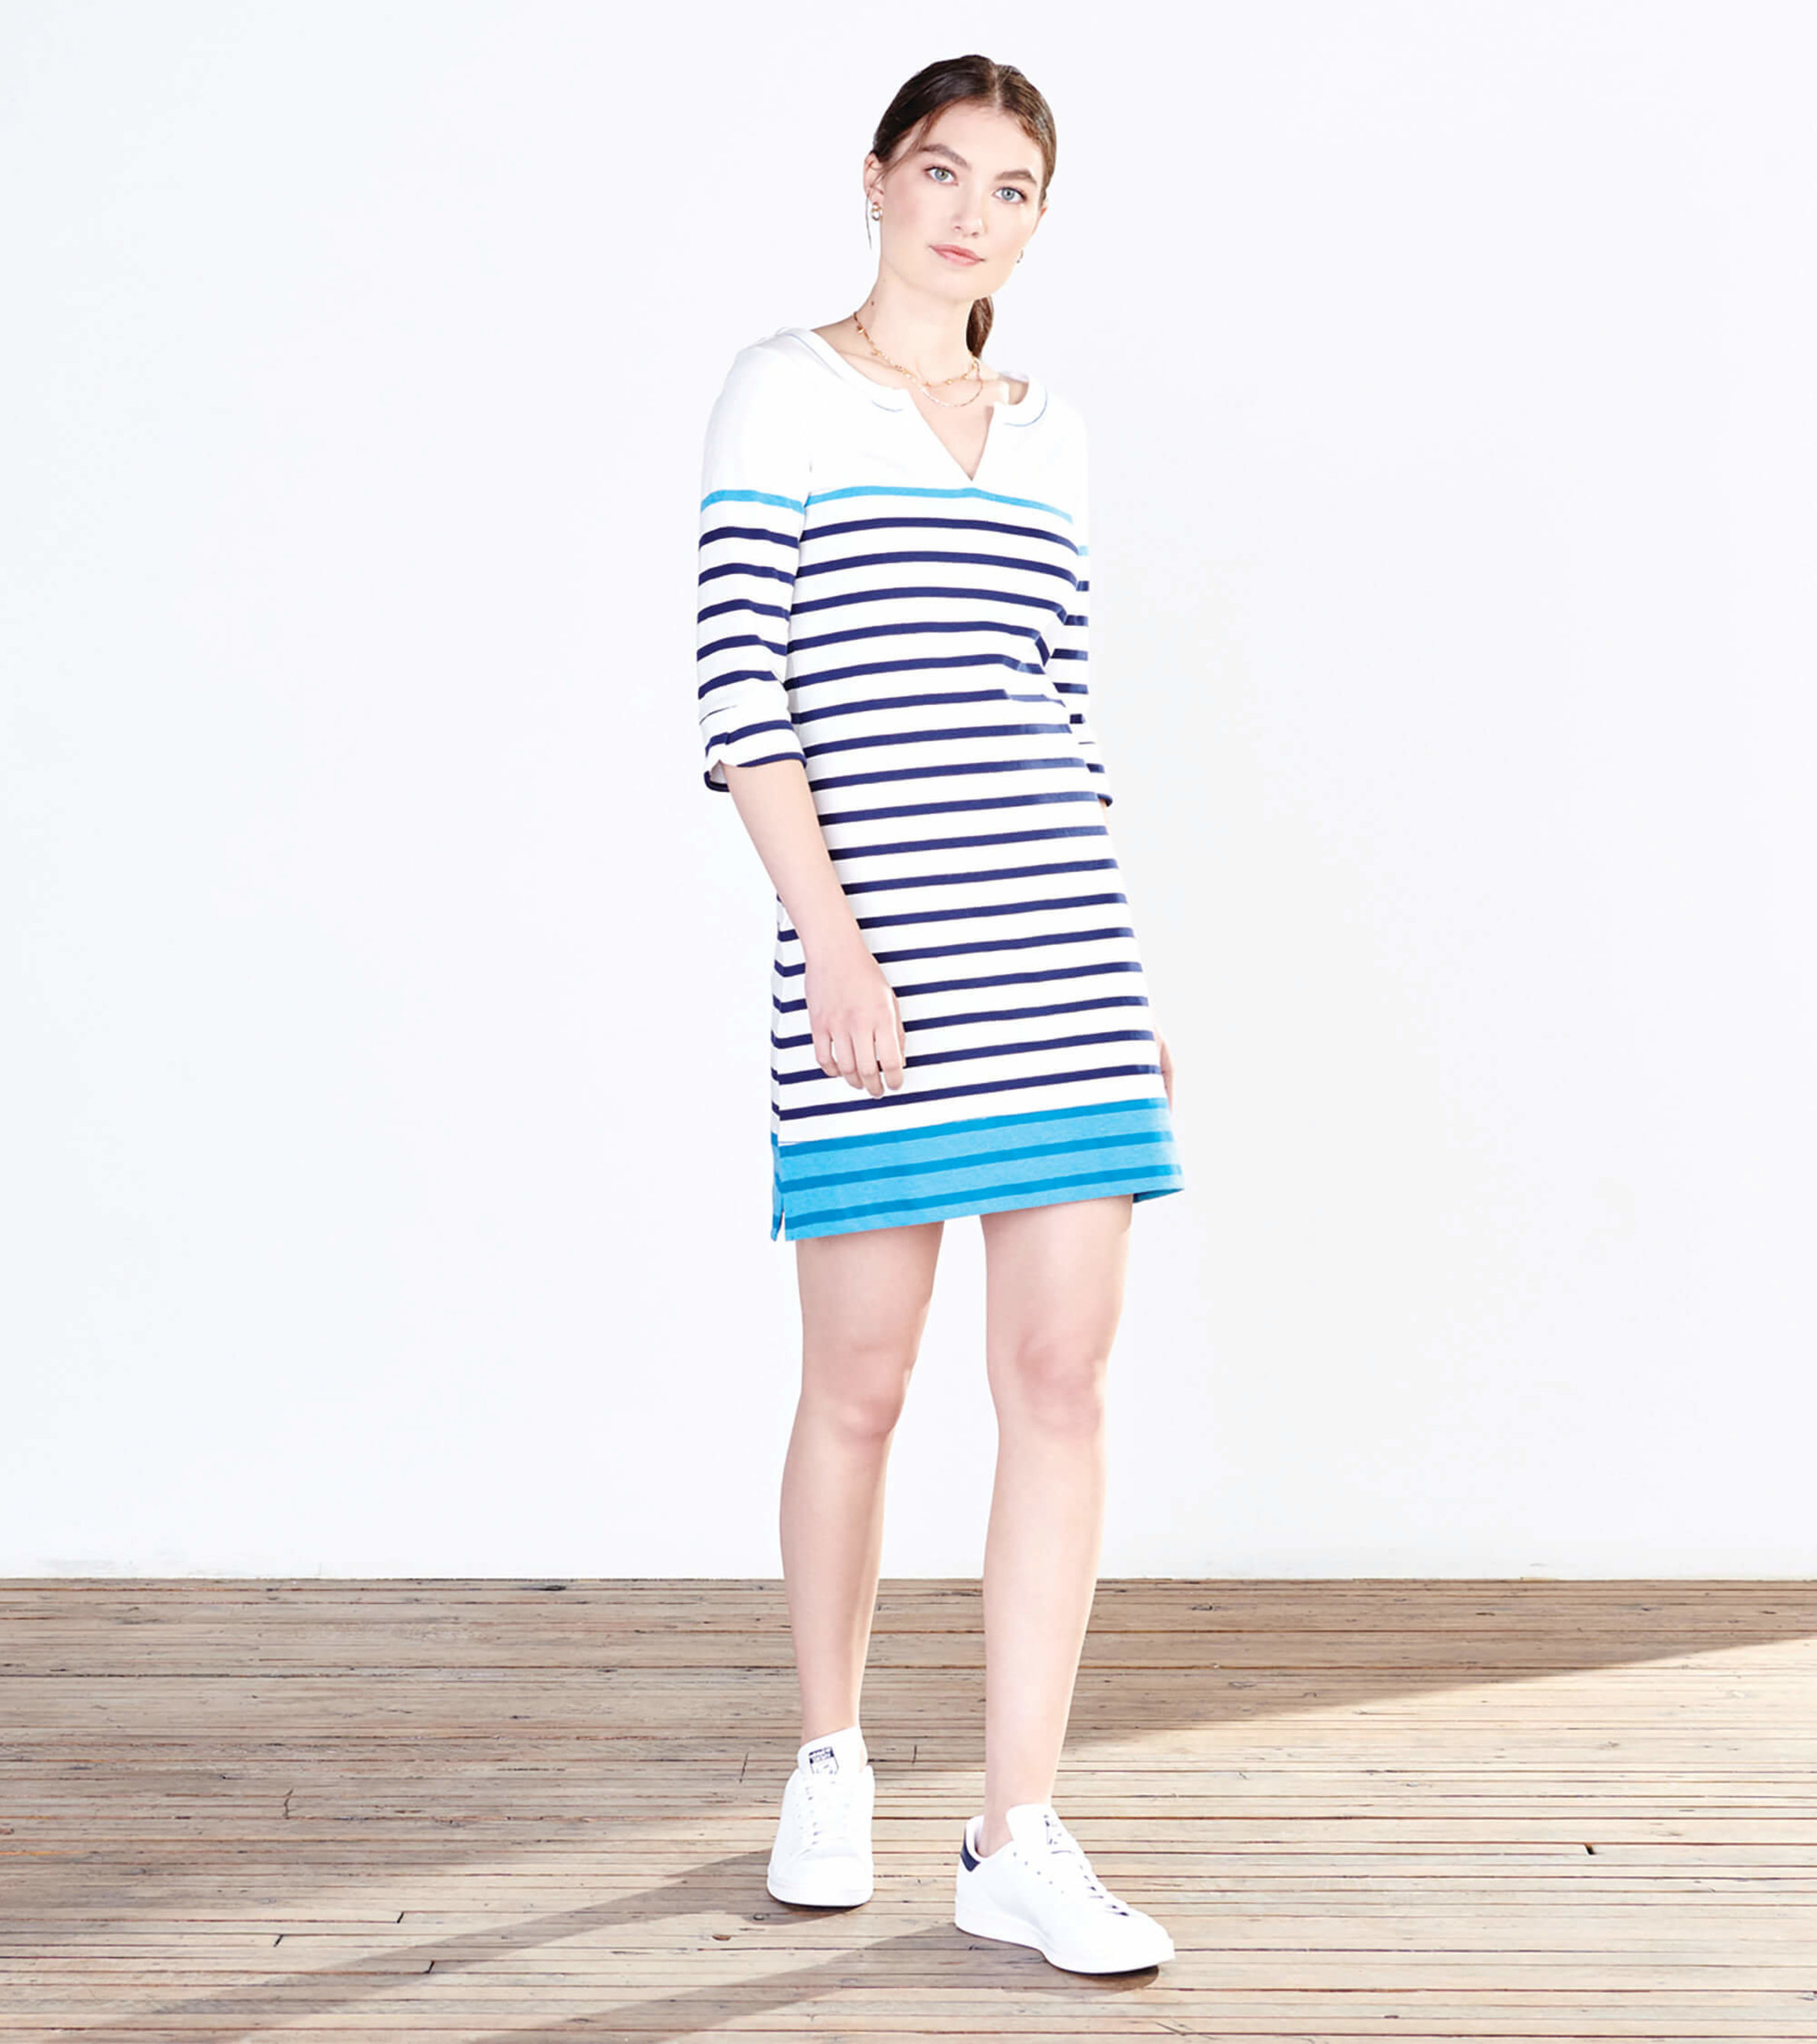 https://cdn.hatley.com/product_images/lucy-dress-french-girl-stripes/S22FSL180A_jpg/pdp_zoom.jpg?c=1643663681&locale=us_en